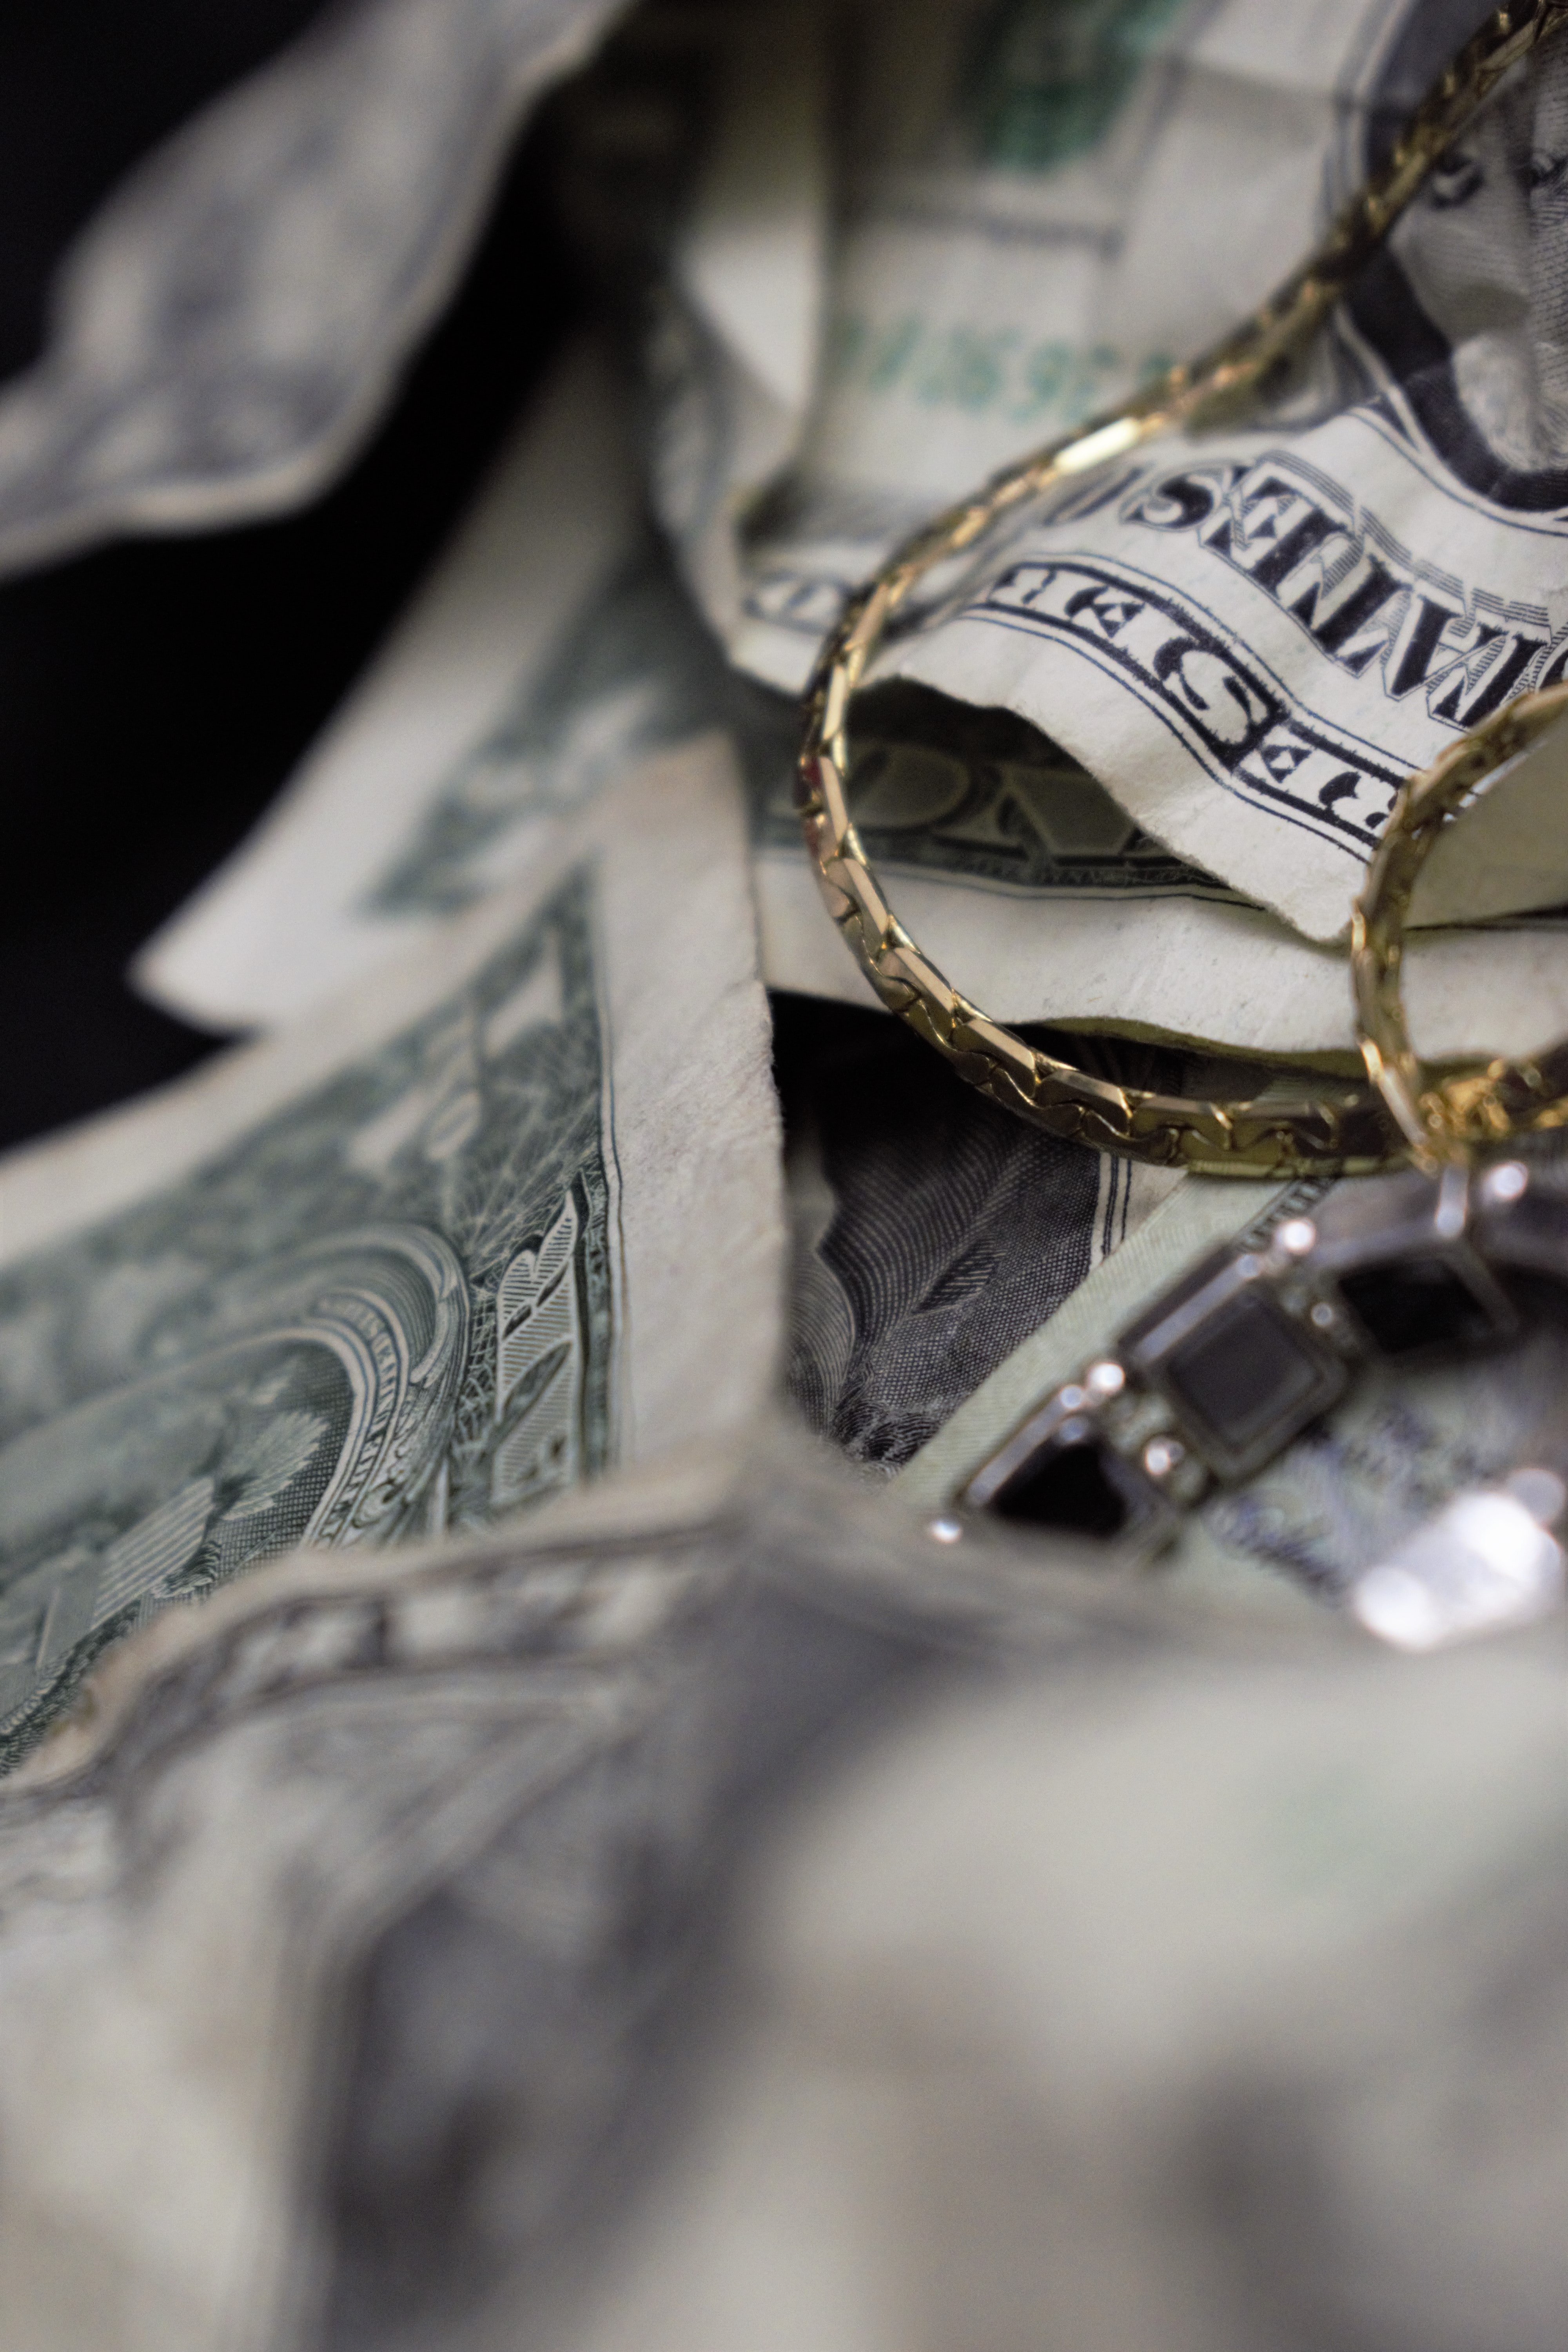 Frank found money and jewelry in the bag. | Source: Unsplash